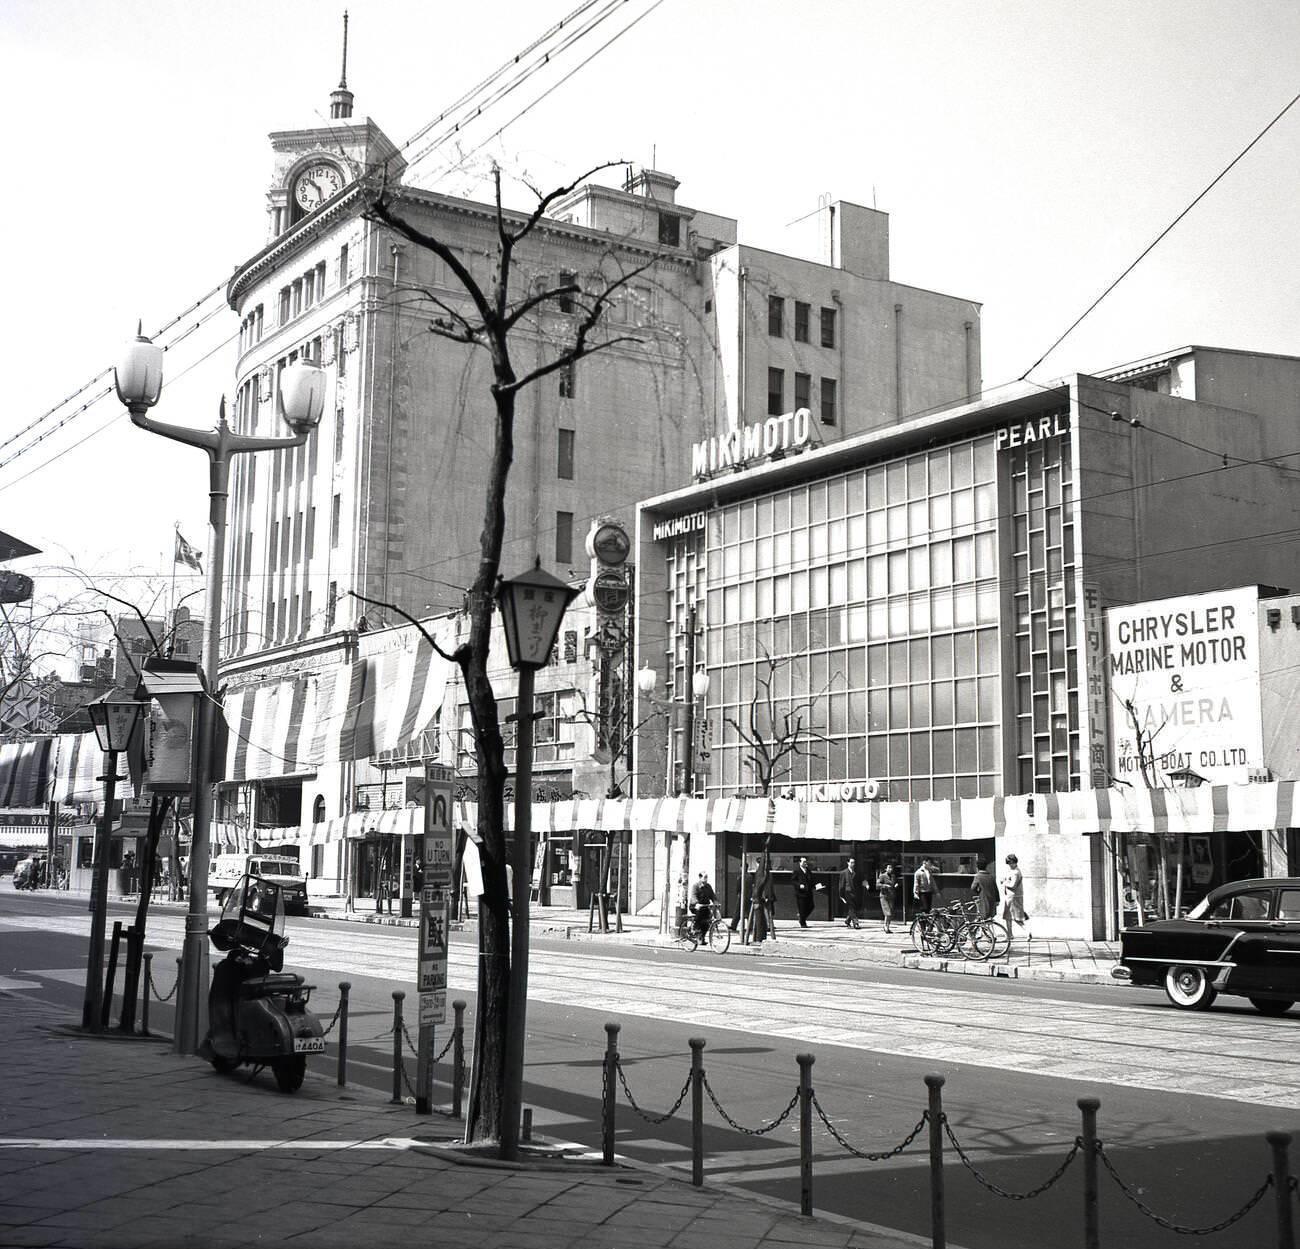 A street in the city of Tokyo showing the offices of the famous Mikimoto pearl company, 1950s.